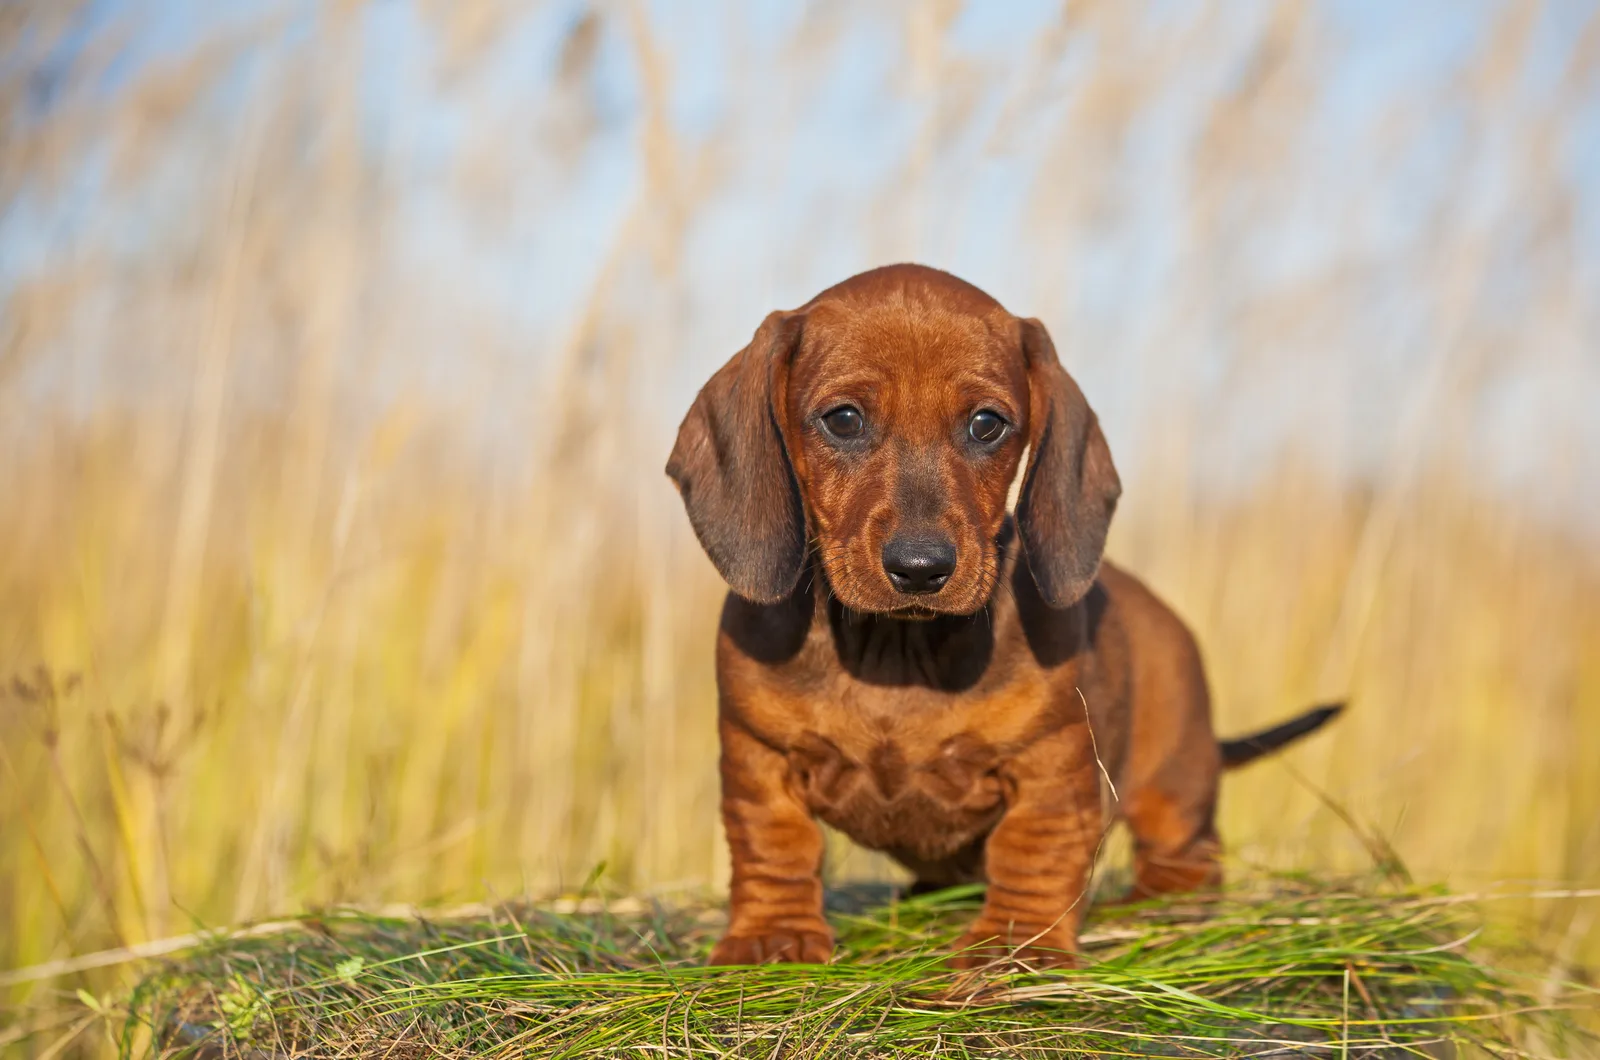 Dachshund stands in the grass